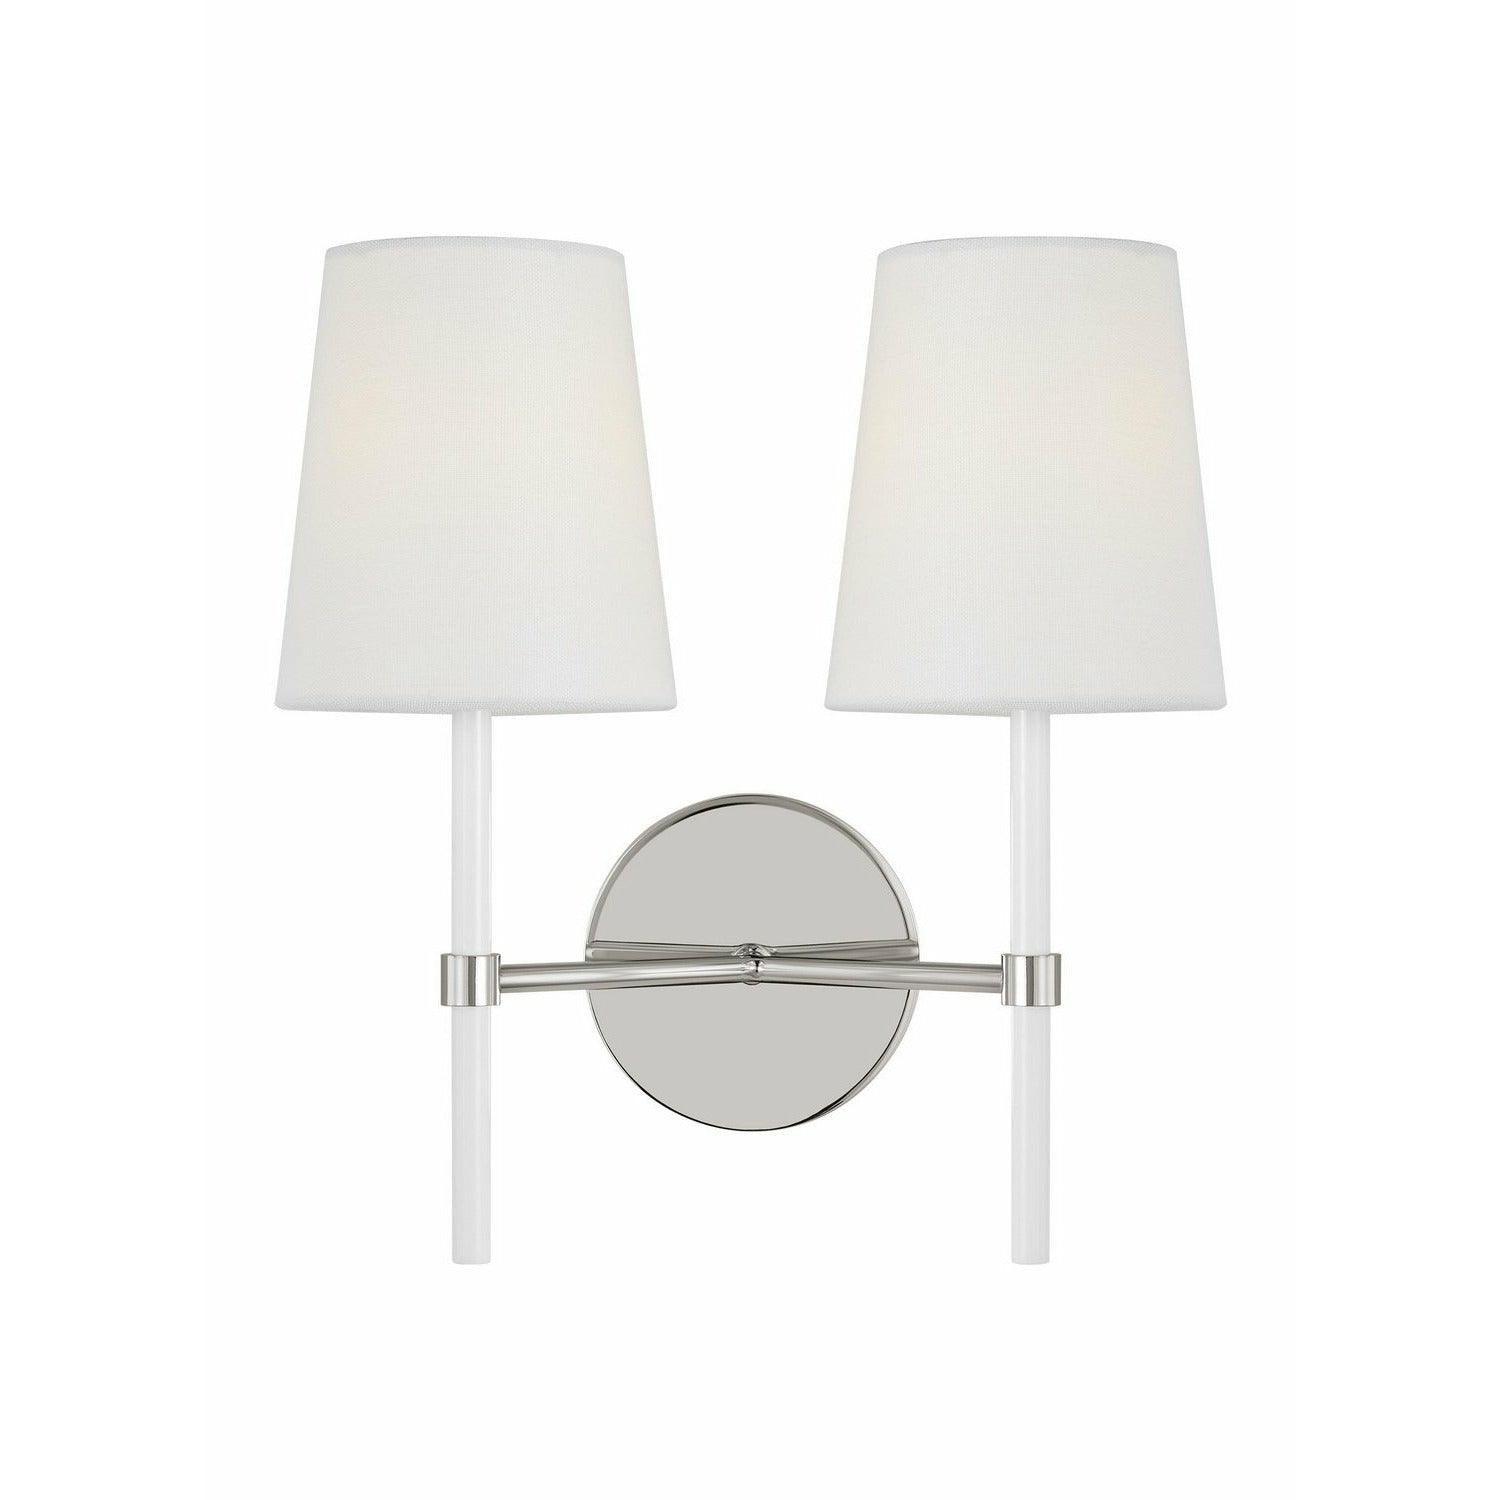 Visual Comfort Studio Collection - Monroe Double Wall Sconce - KSW1102PNGW | Montreal Lighting & Hardware